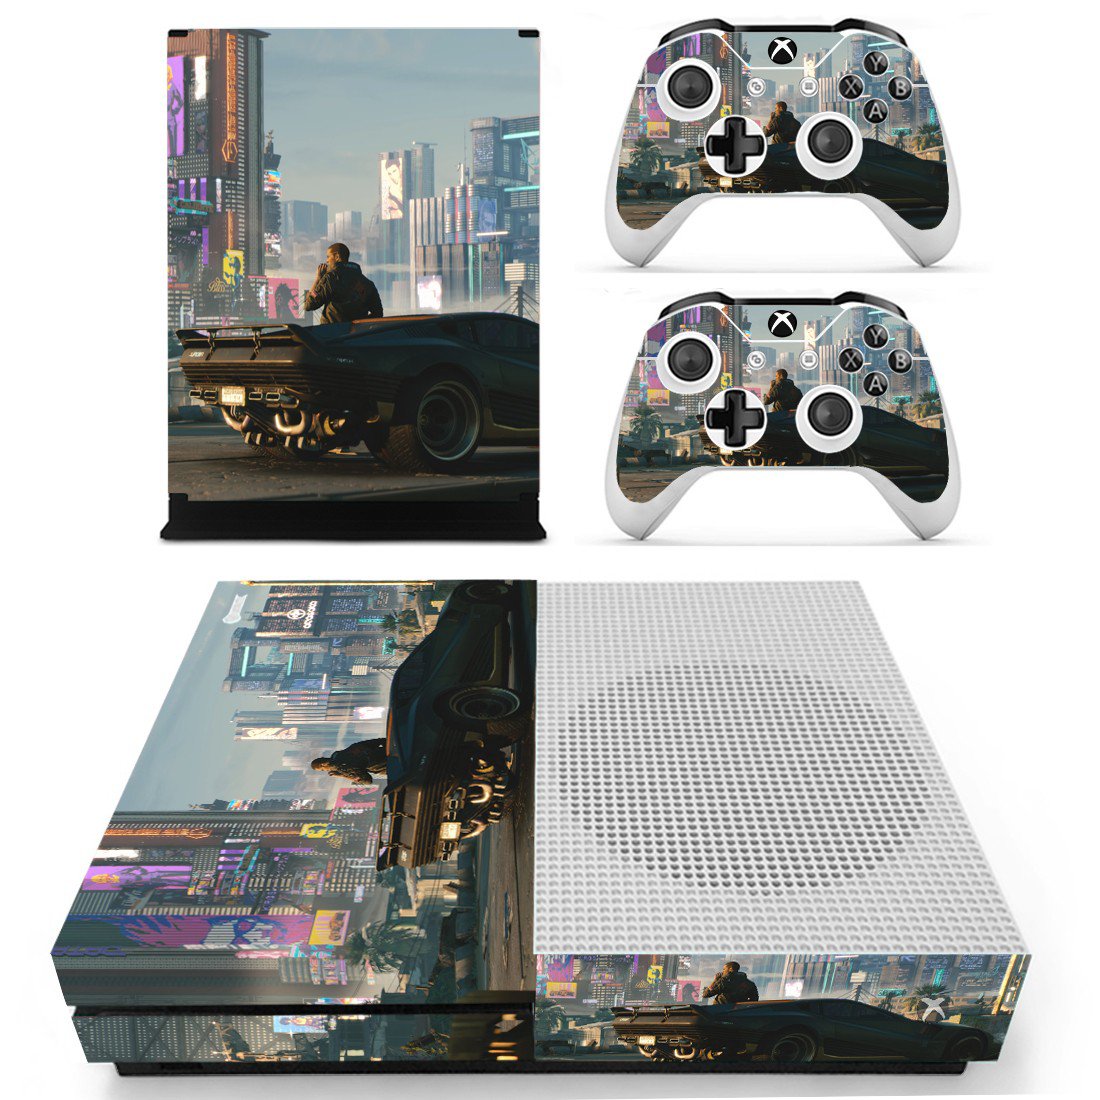 Xbox One S And Controllers Skin Cover Cyberpunk 2077